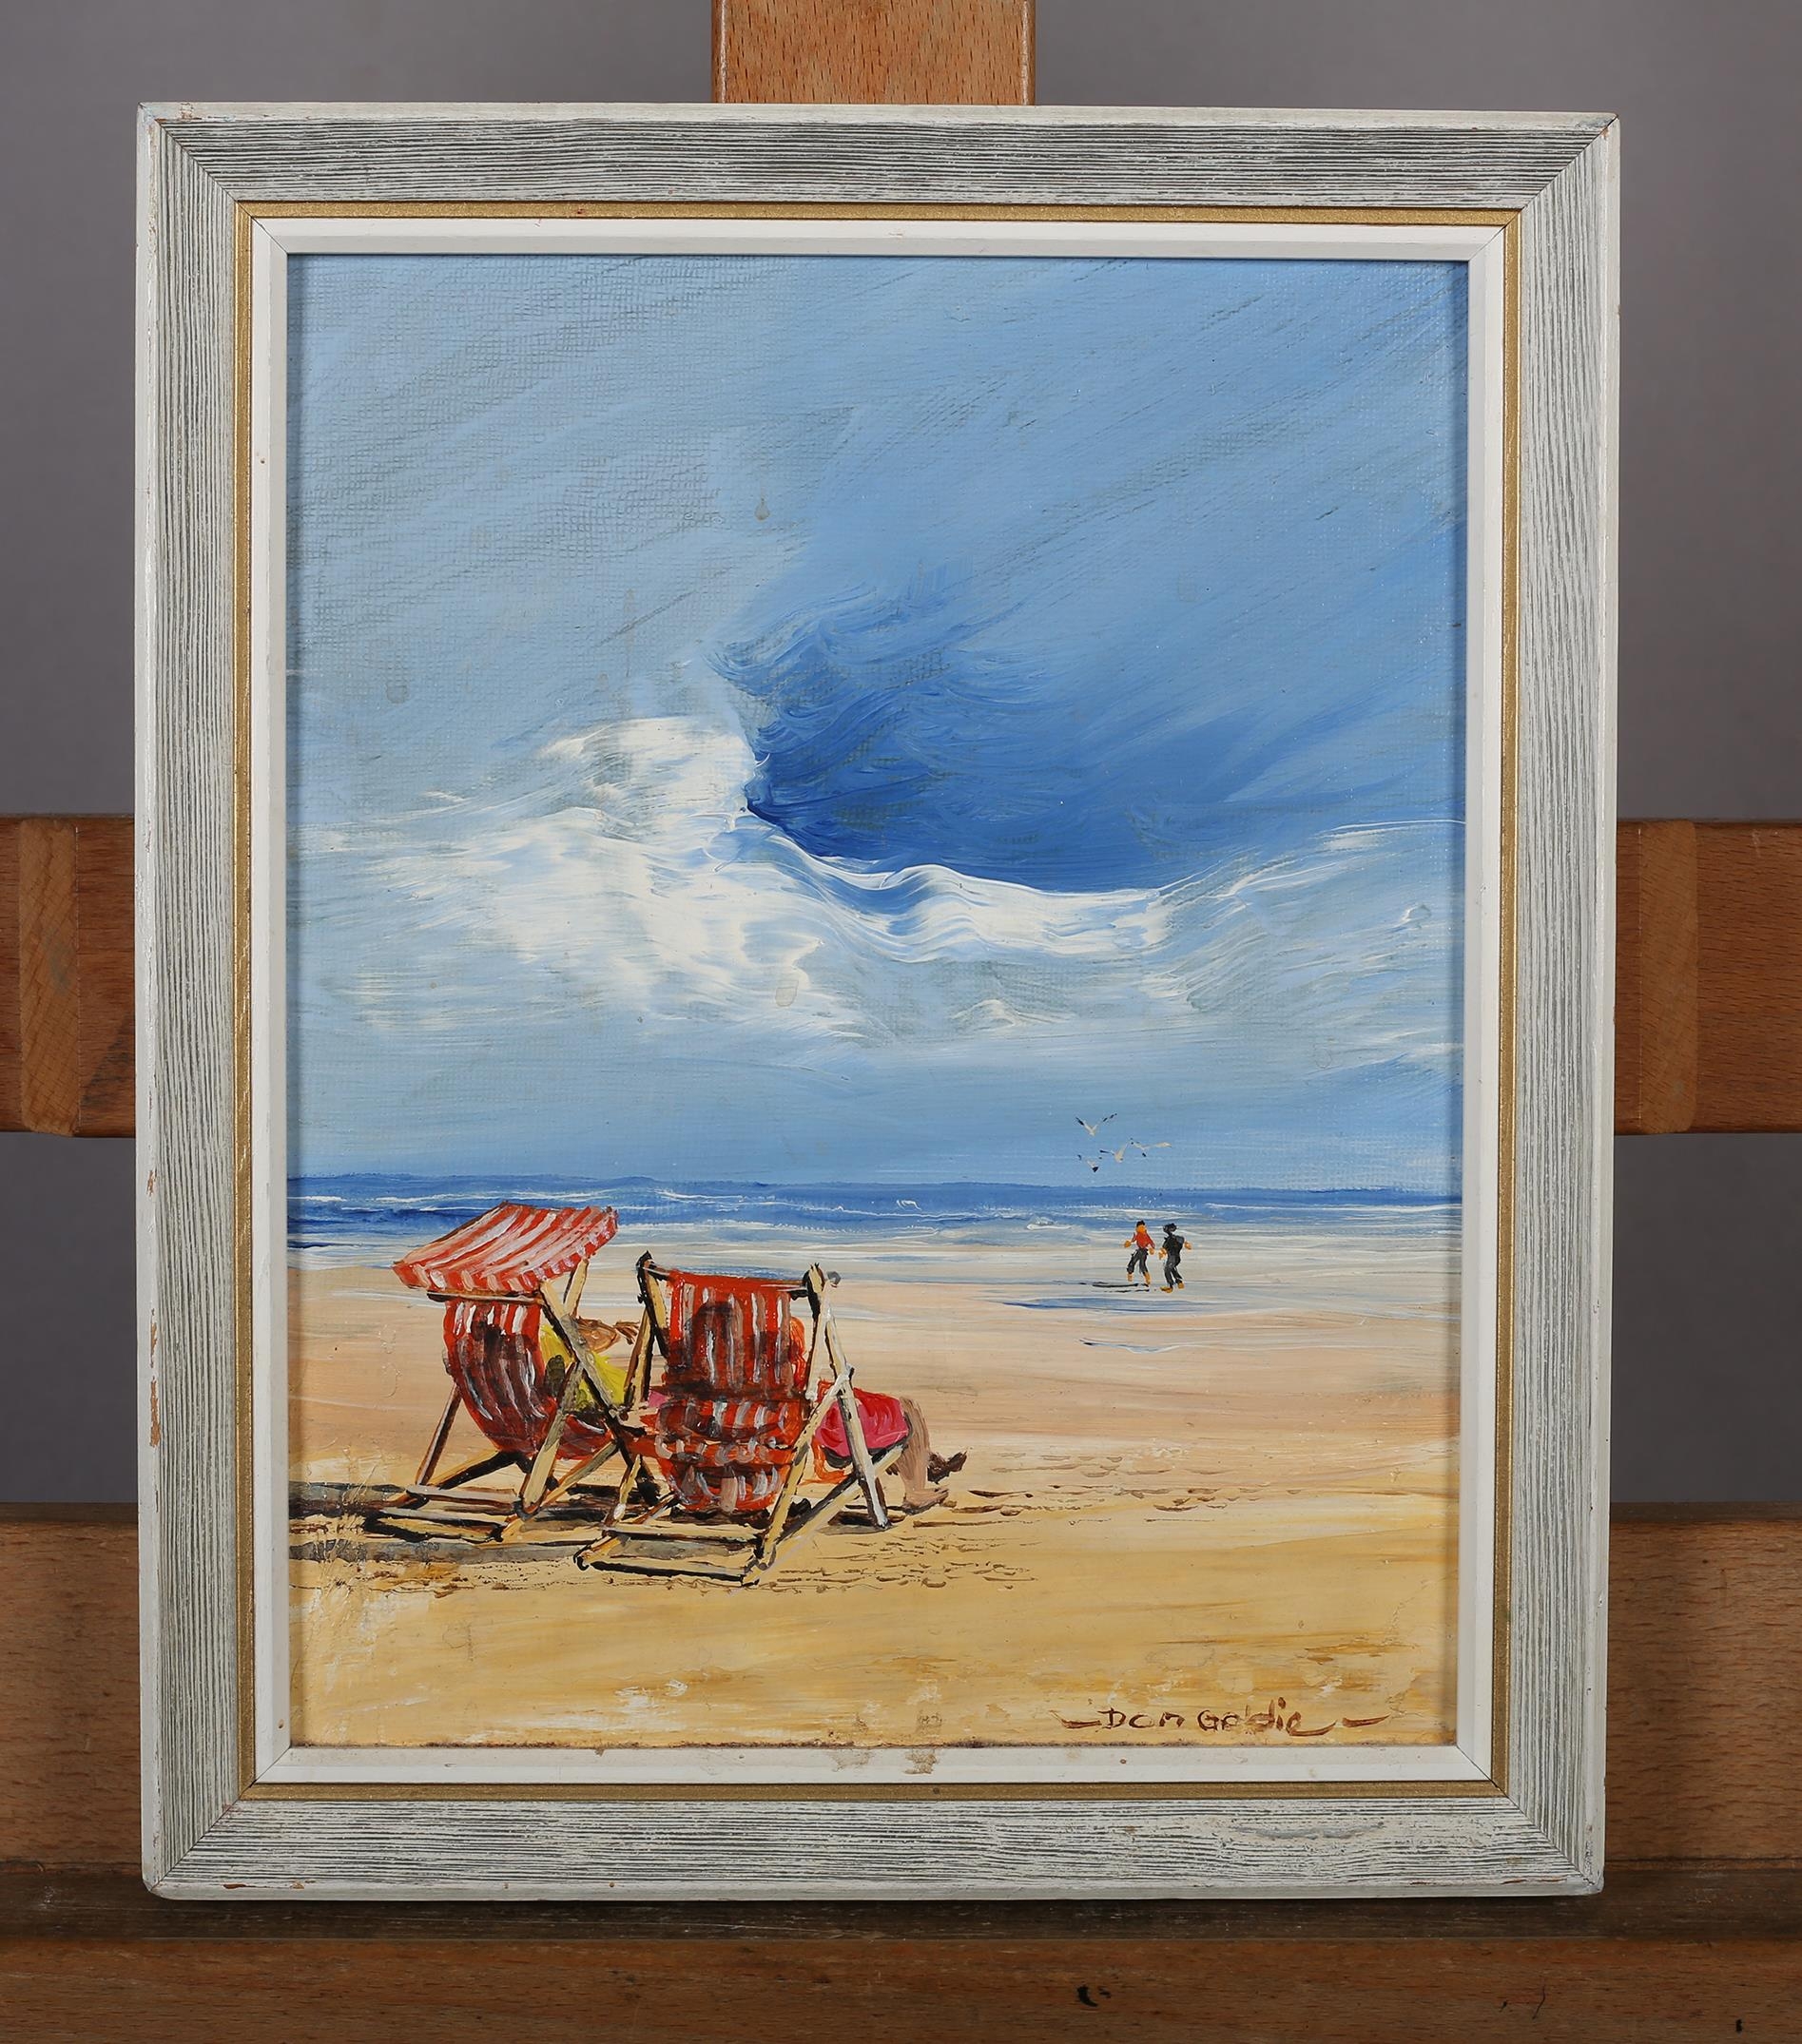 ARR Dom Goldie (Contemporary), Sitting On The Beach, oil on board, signed to lower right, 25cm x - Image 2 of 4